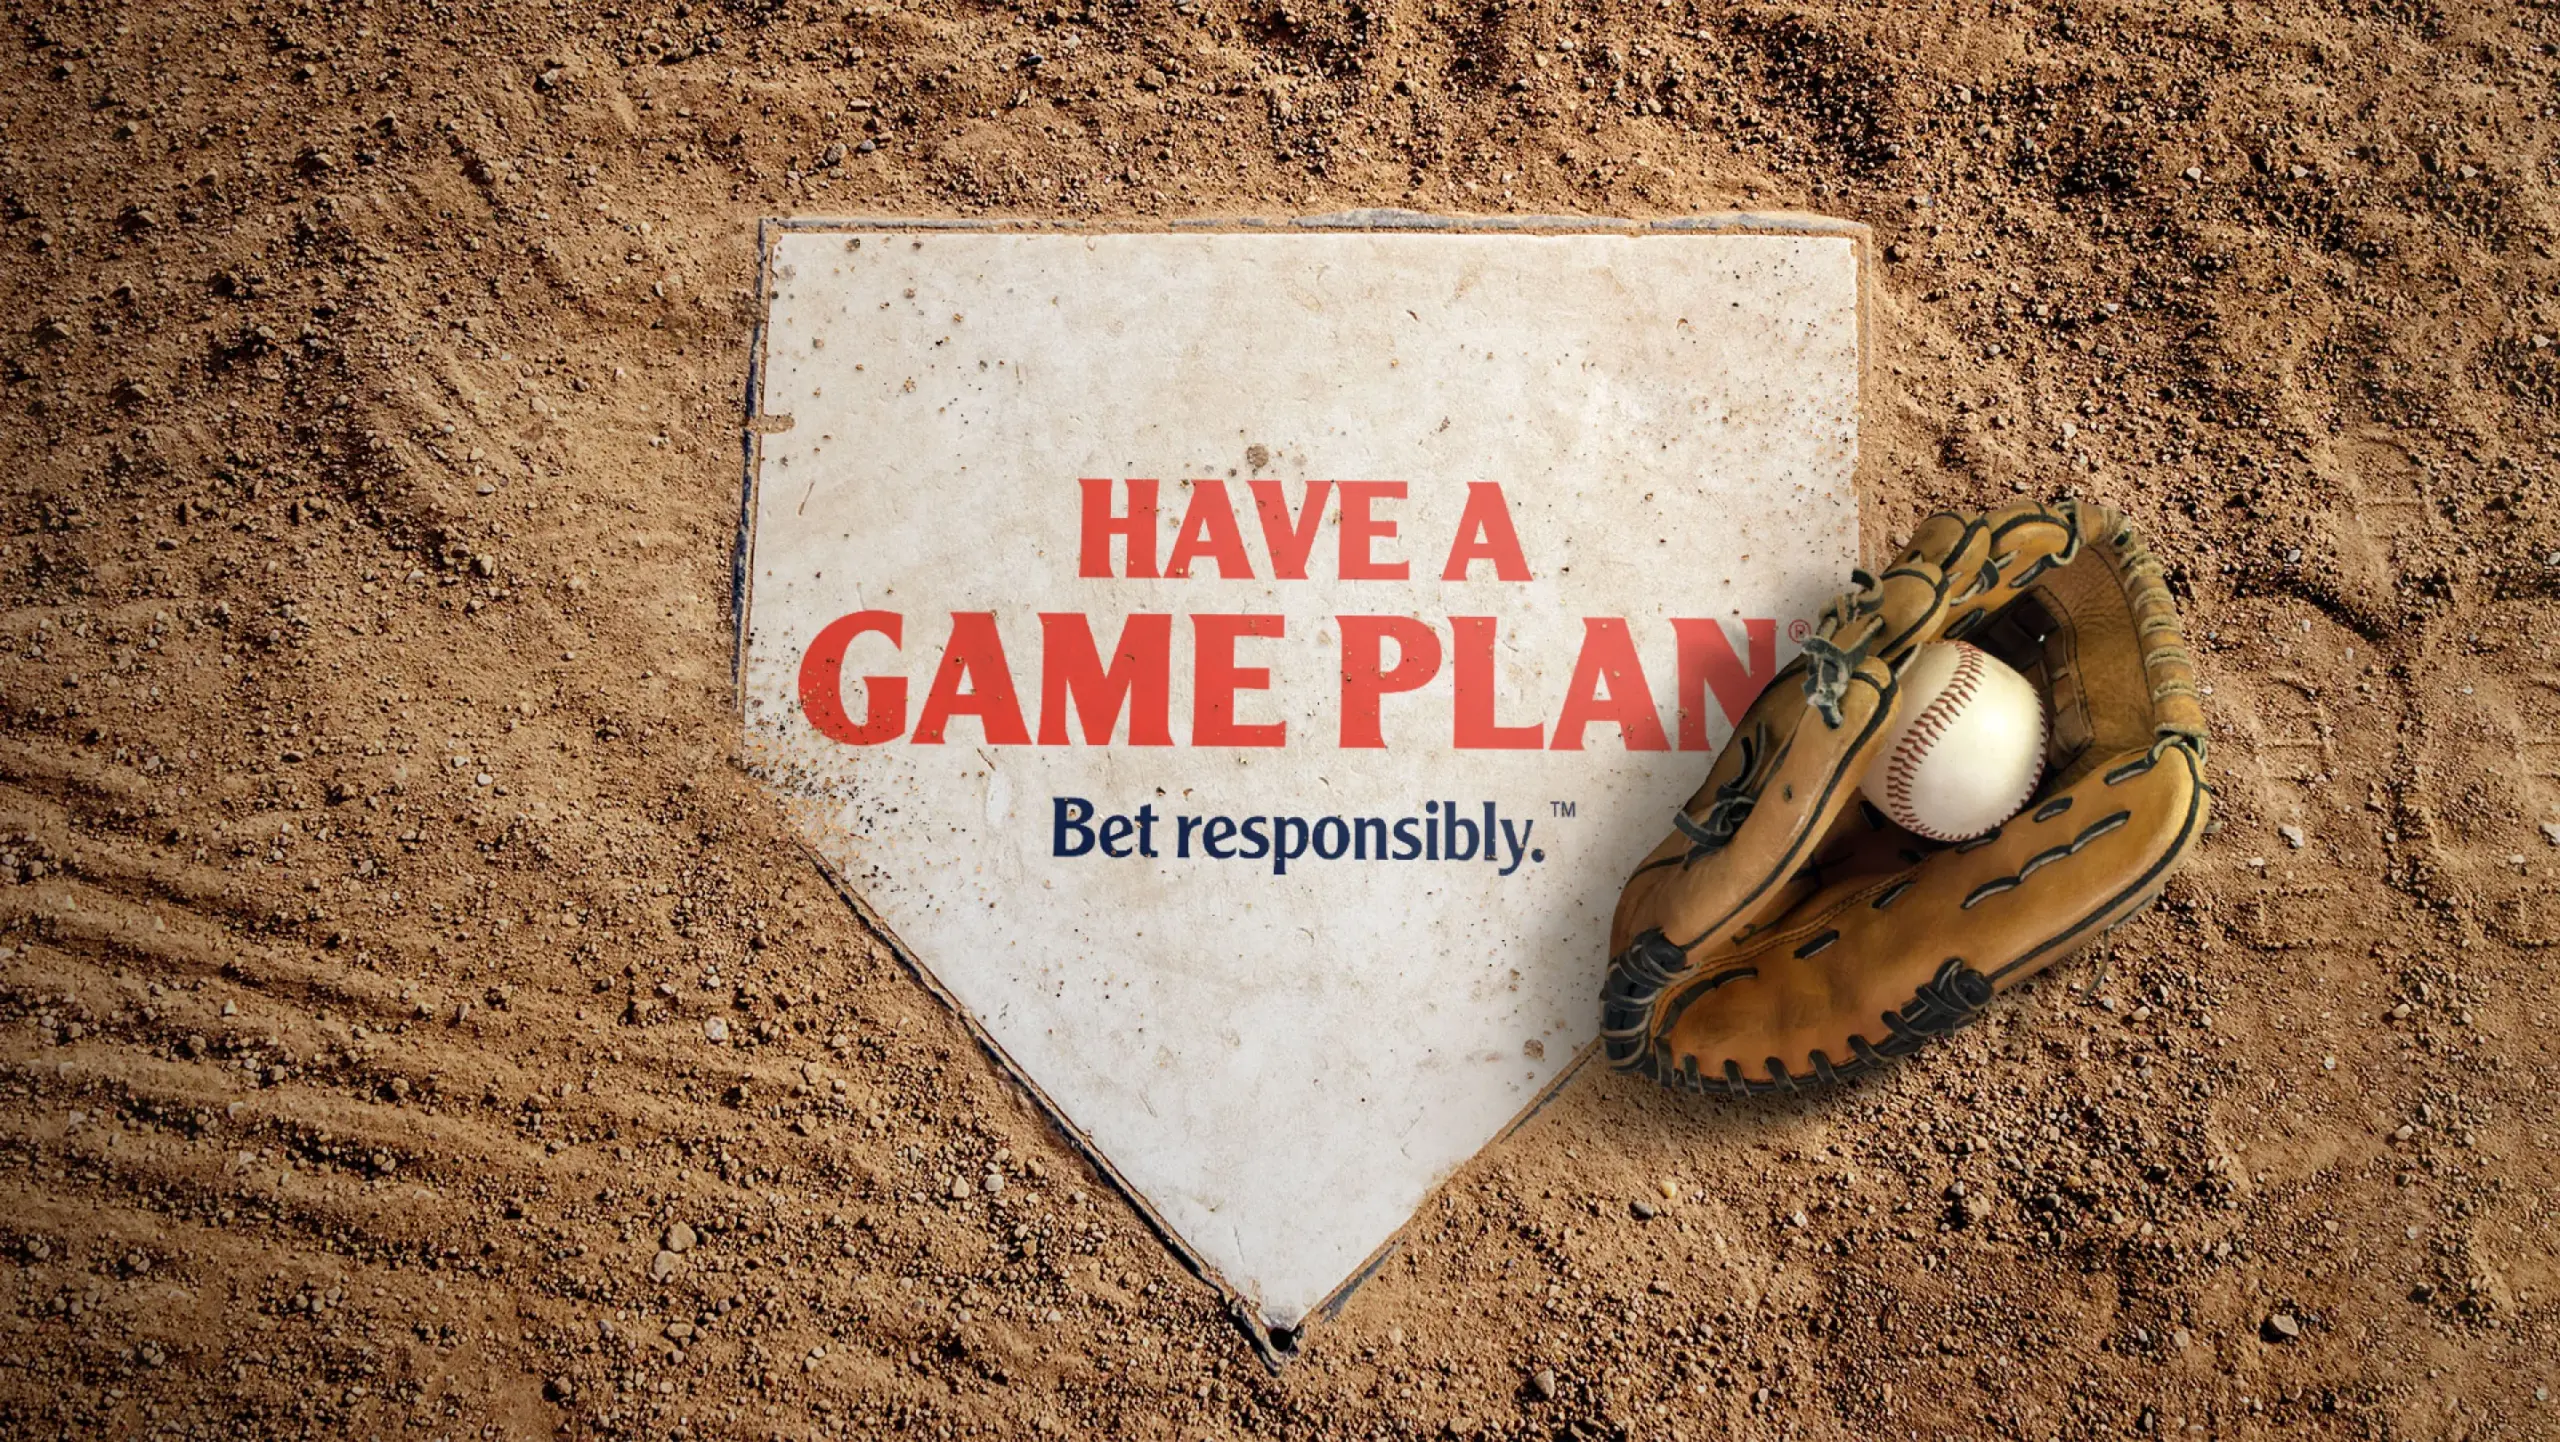 Home plate with the message "Have A Game Plan. Bet responsibly." is written in red and blue text. A baseball glove holding a baseball rests on home plate, surrounded by a dirt field.